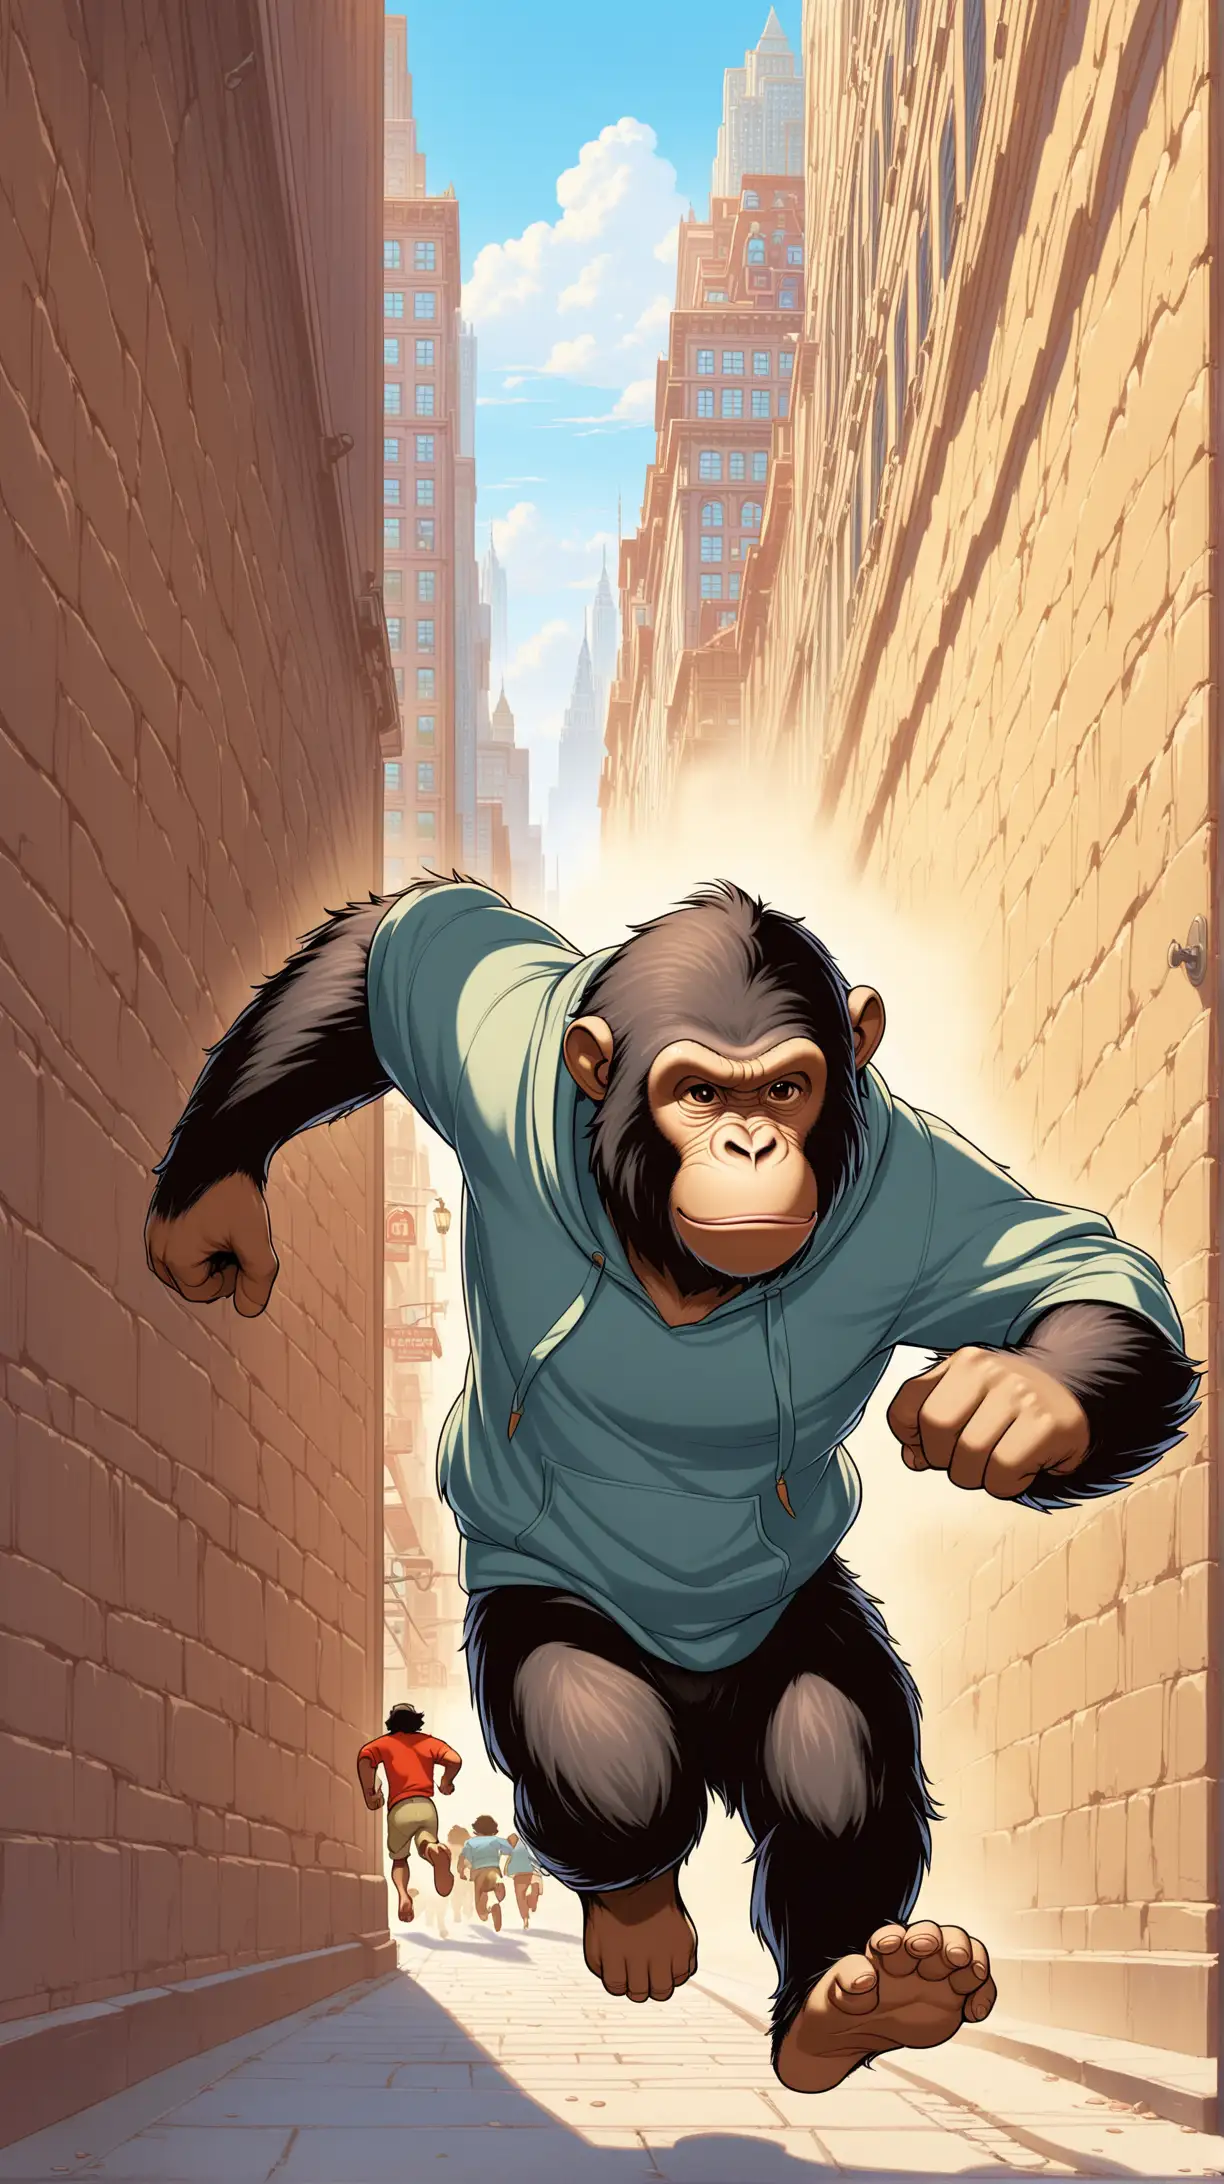 Fleeing Ape in AMC Hoodie Escapes Wall Street Pursuit